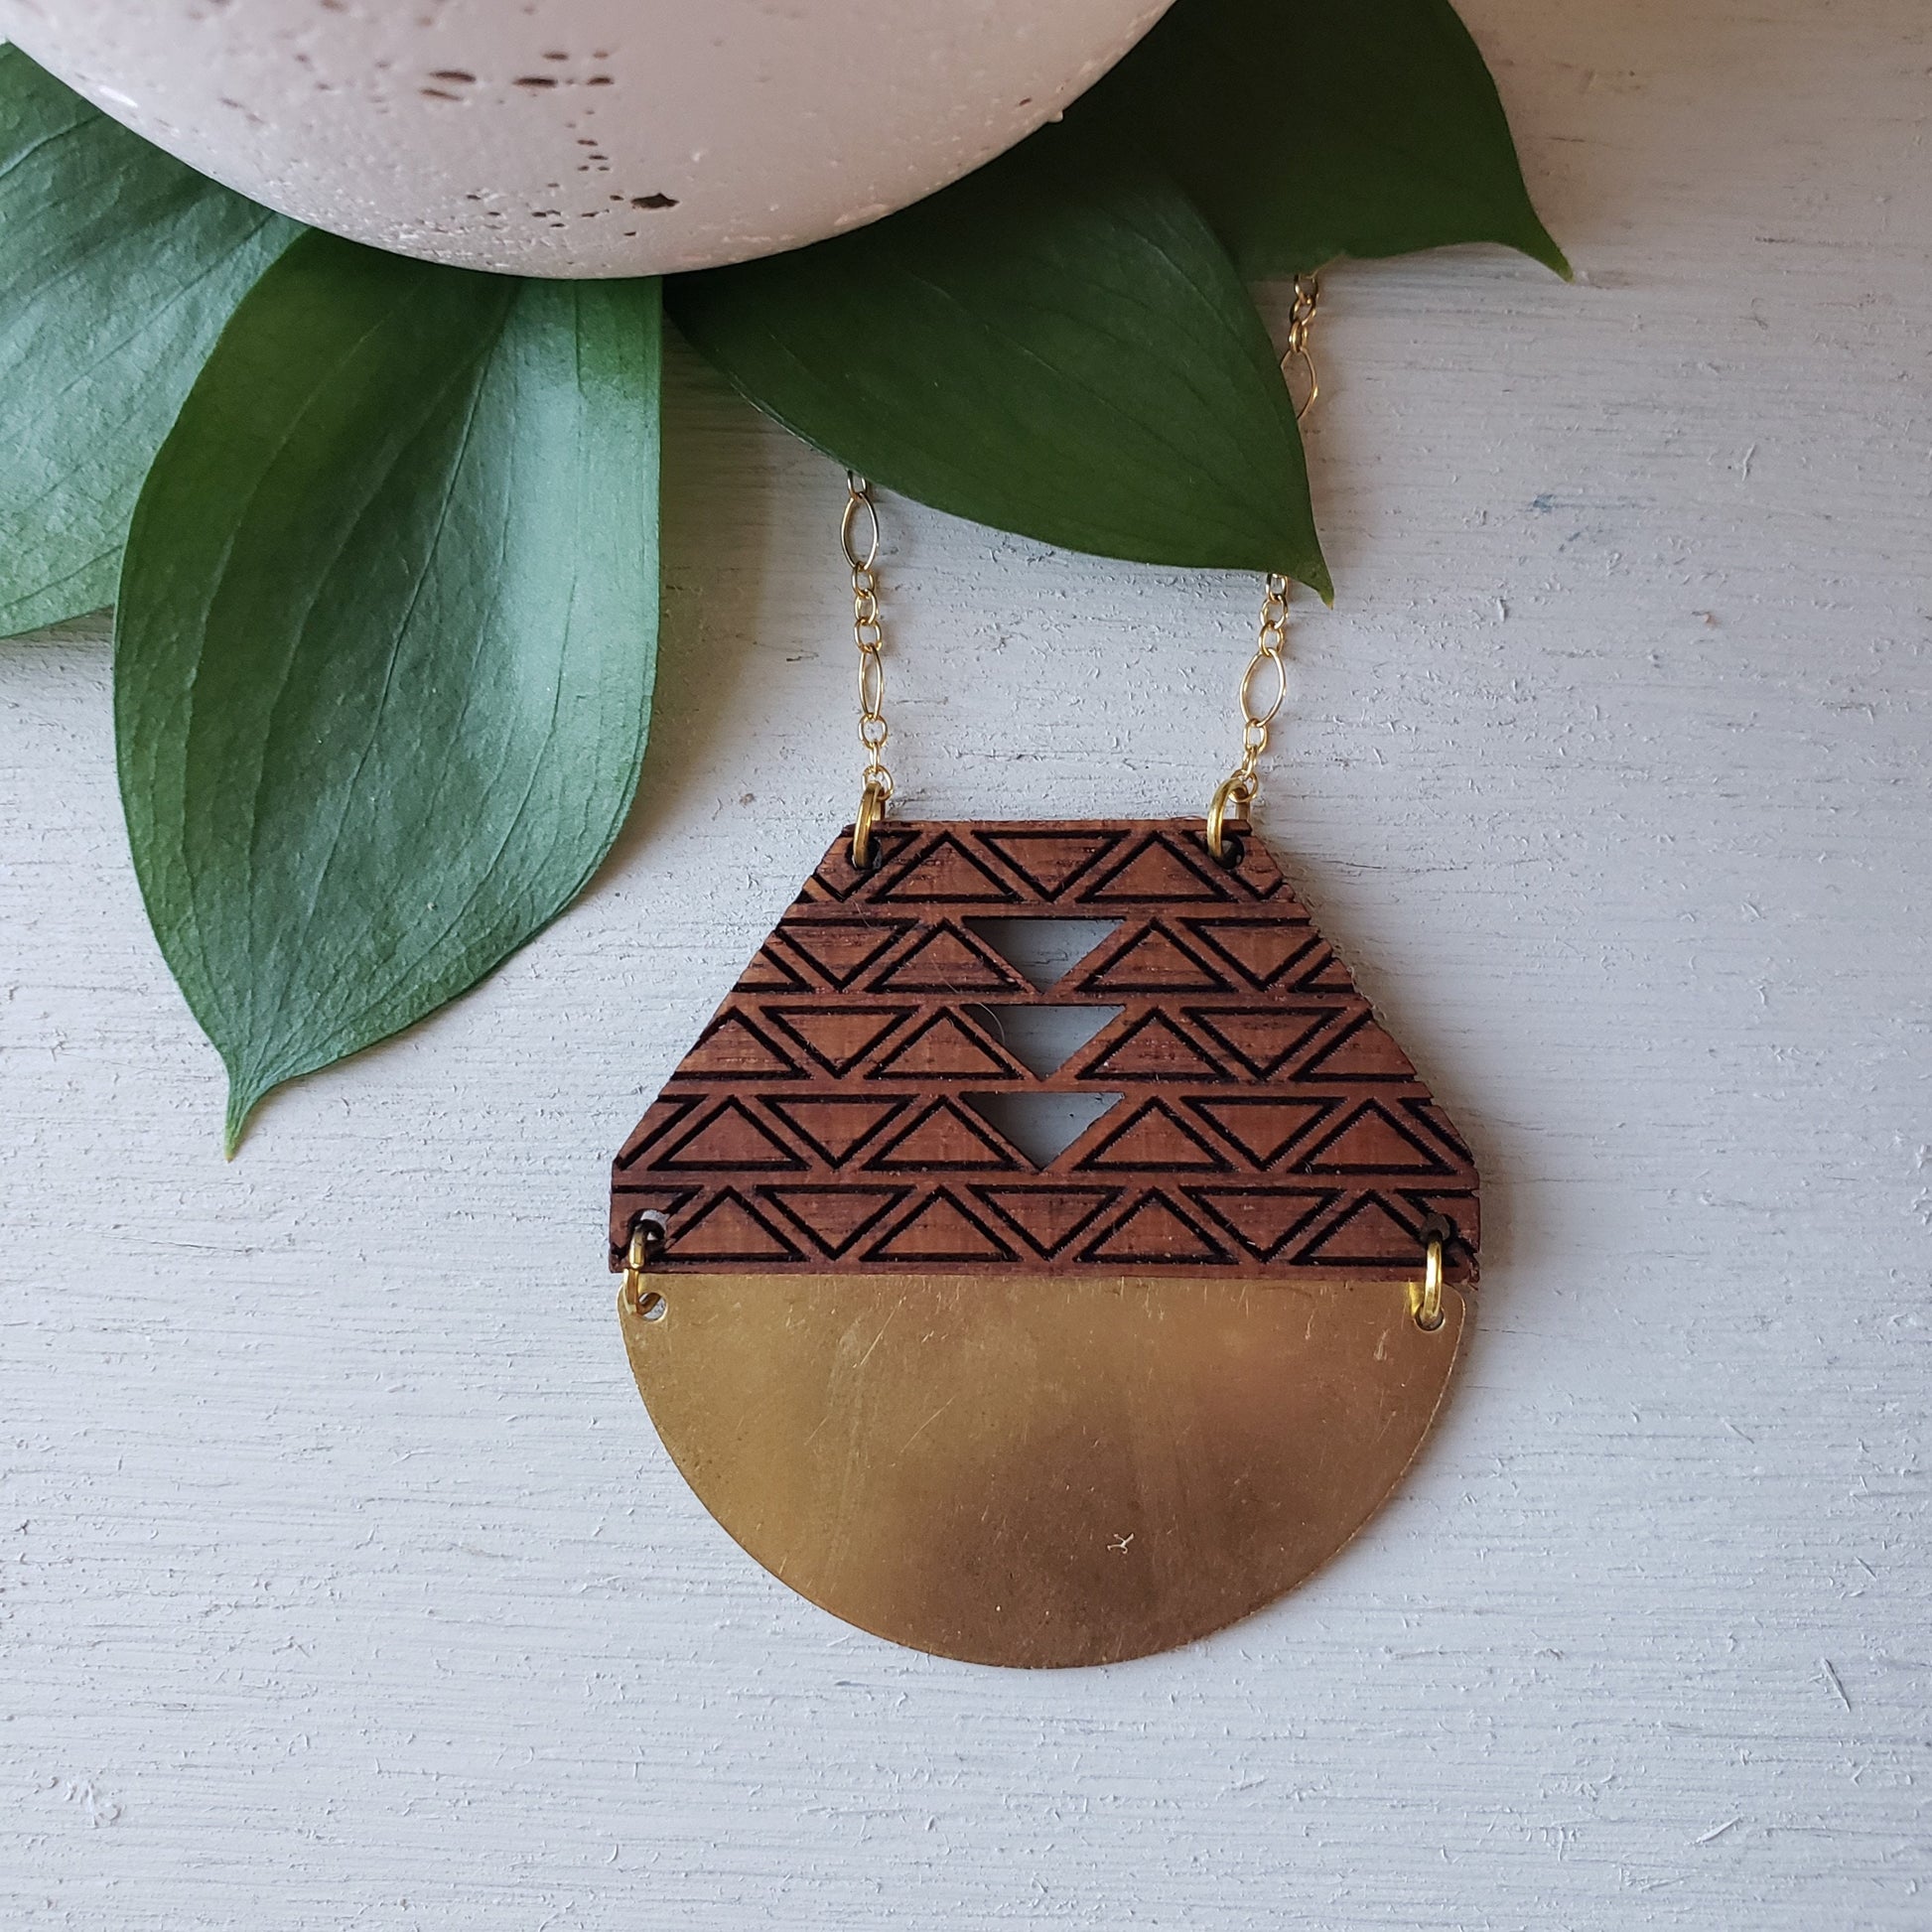 Modern Southwestern necklace - Laser Cut Wood Necklace || Geometric Jewelry - Gift for Wife, Gift for Women